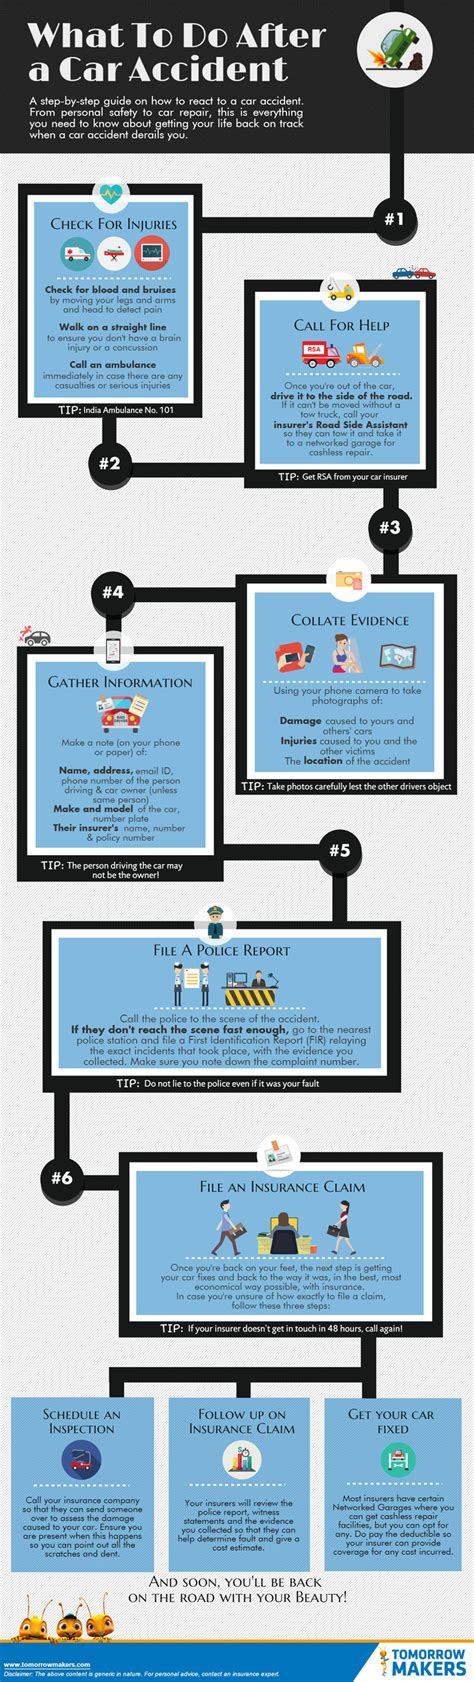 What To Do After A Car Accident Infographic The Economic Times